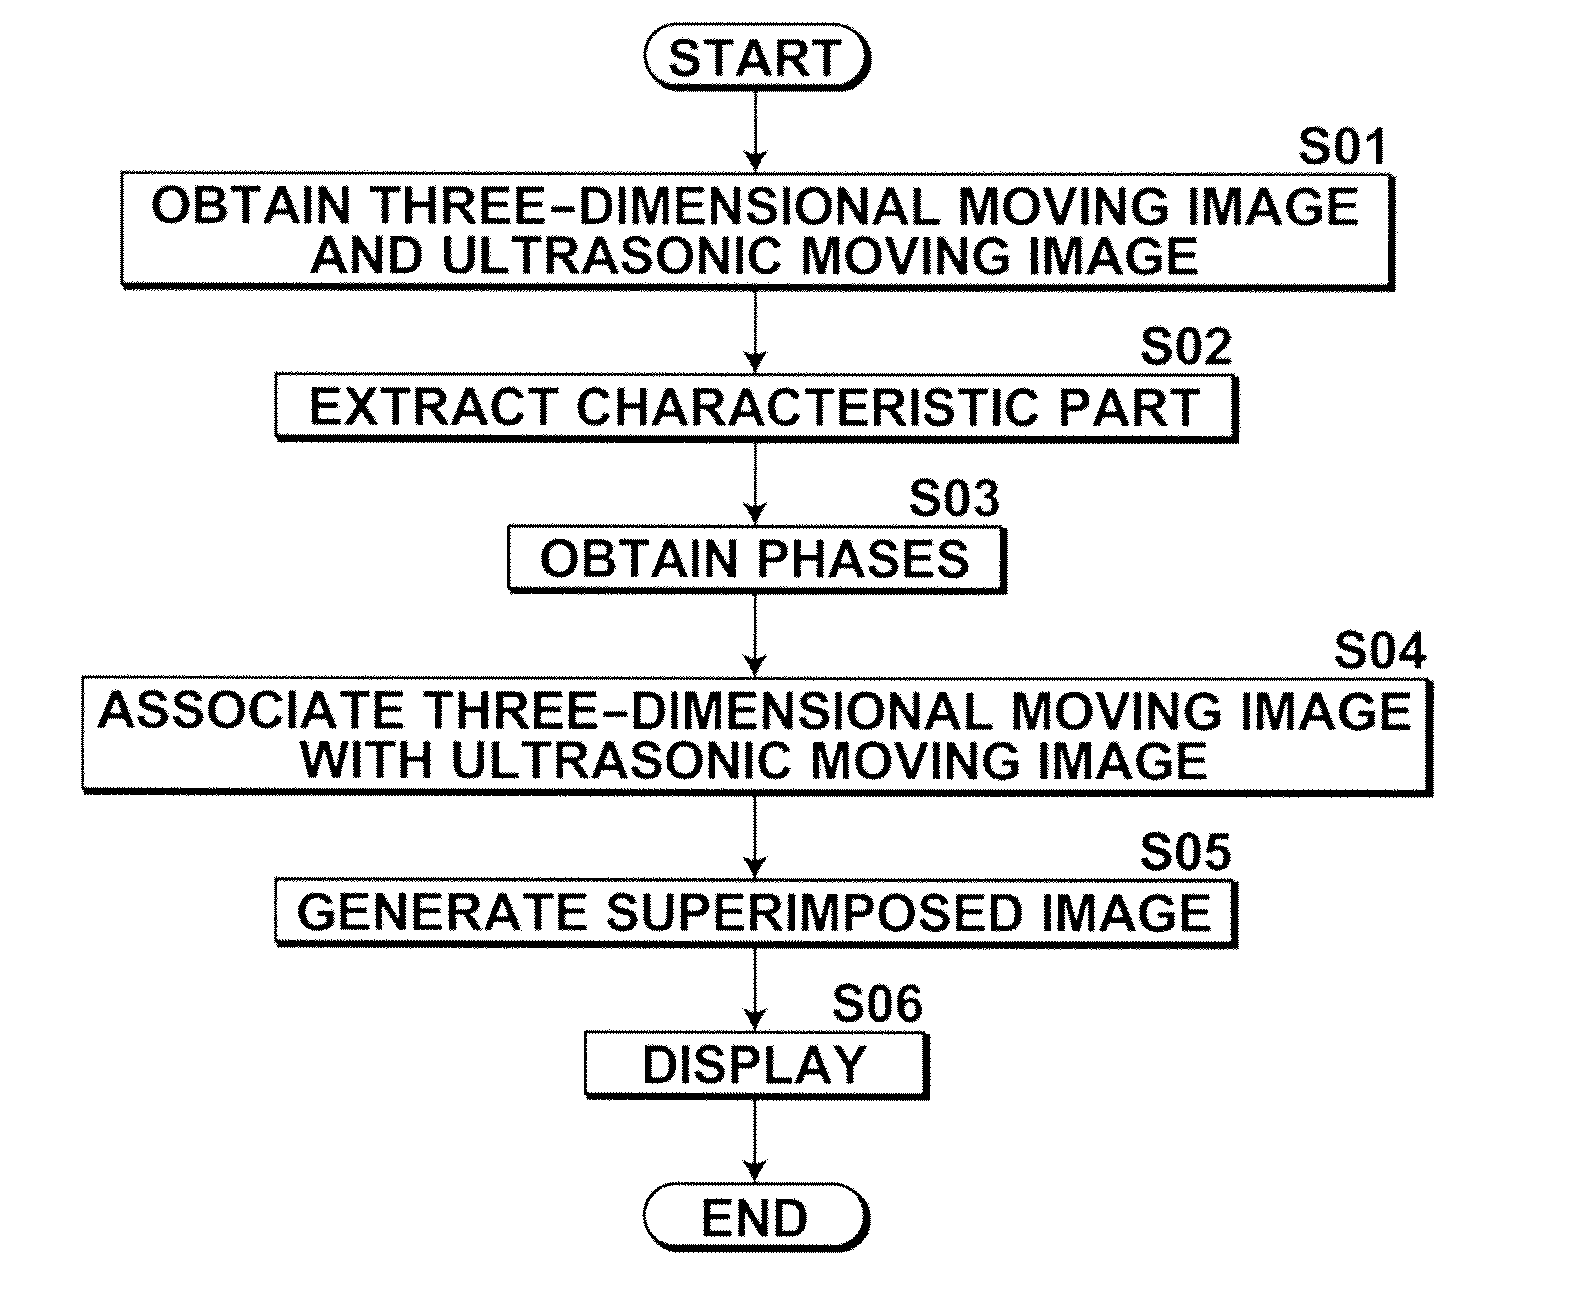 Image processing device, method and program